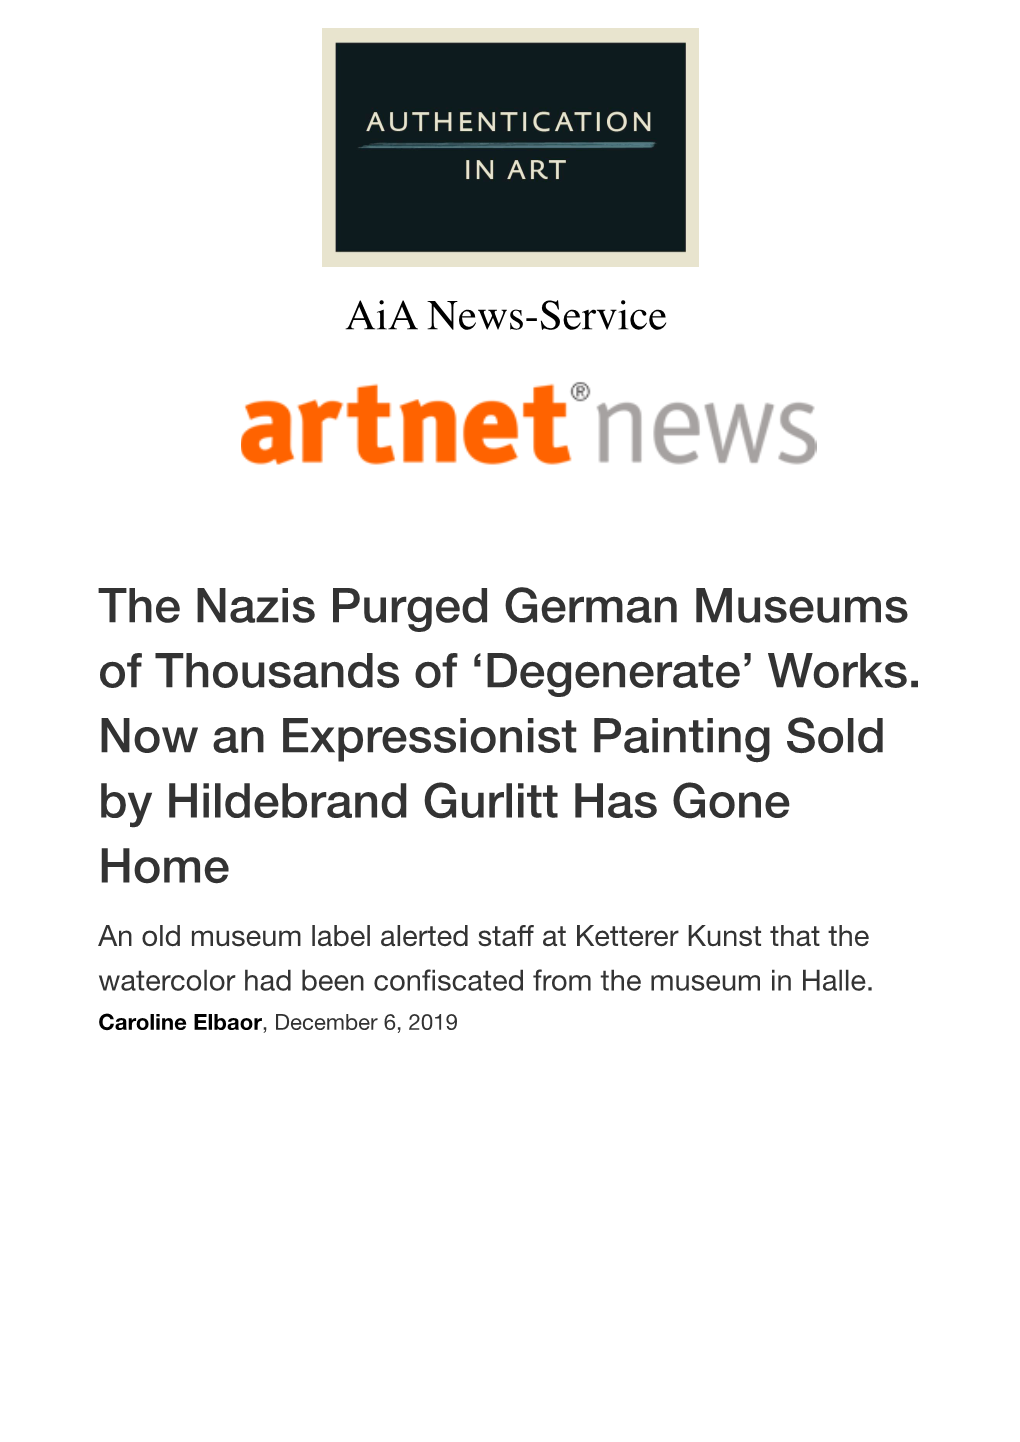 The Nazis Purged German Museums of Thousands of 'Degenerate